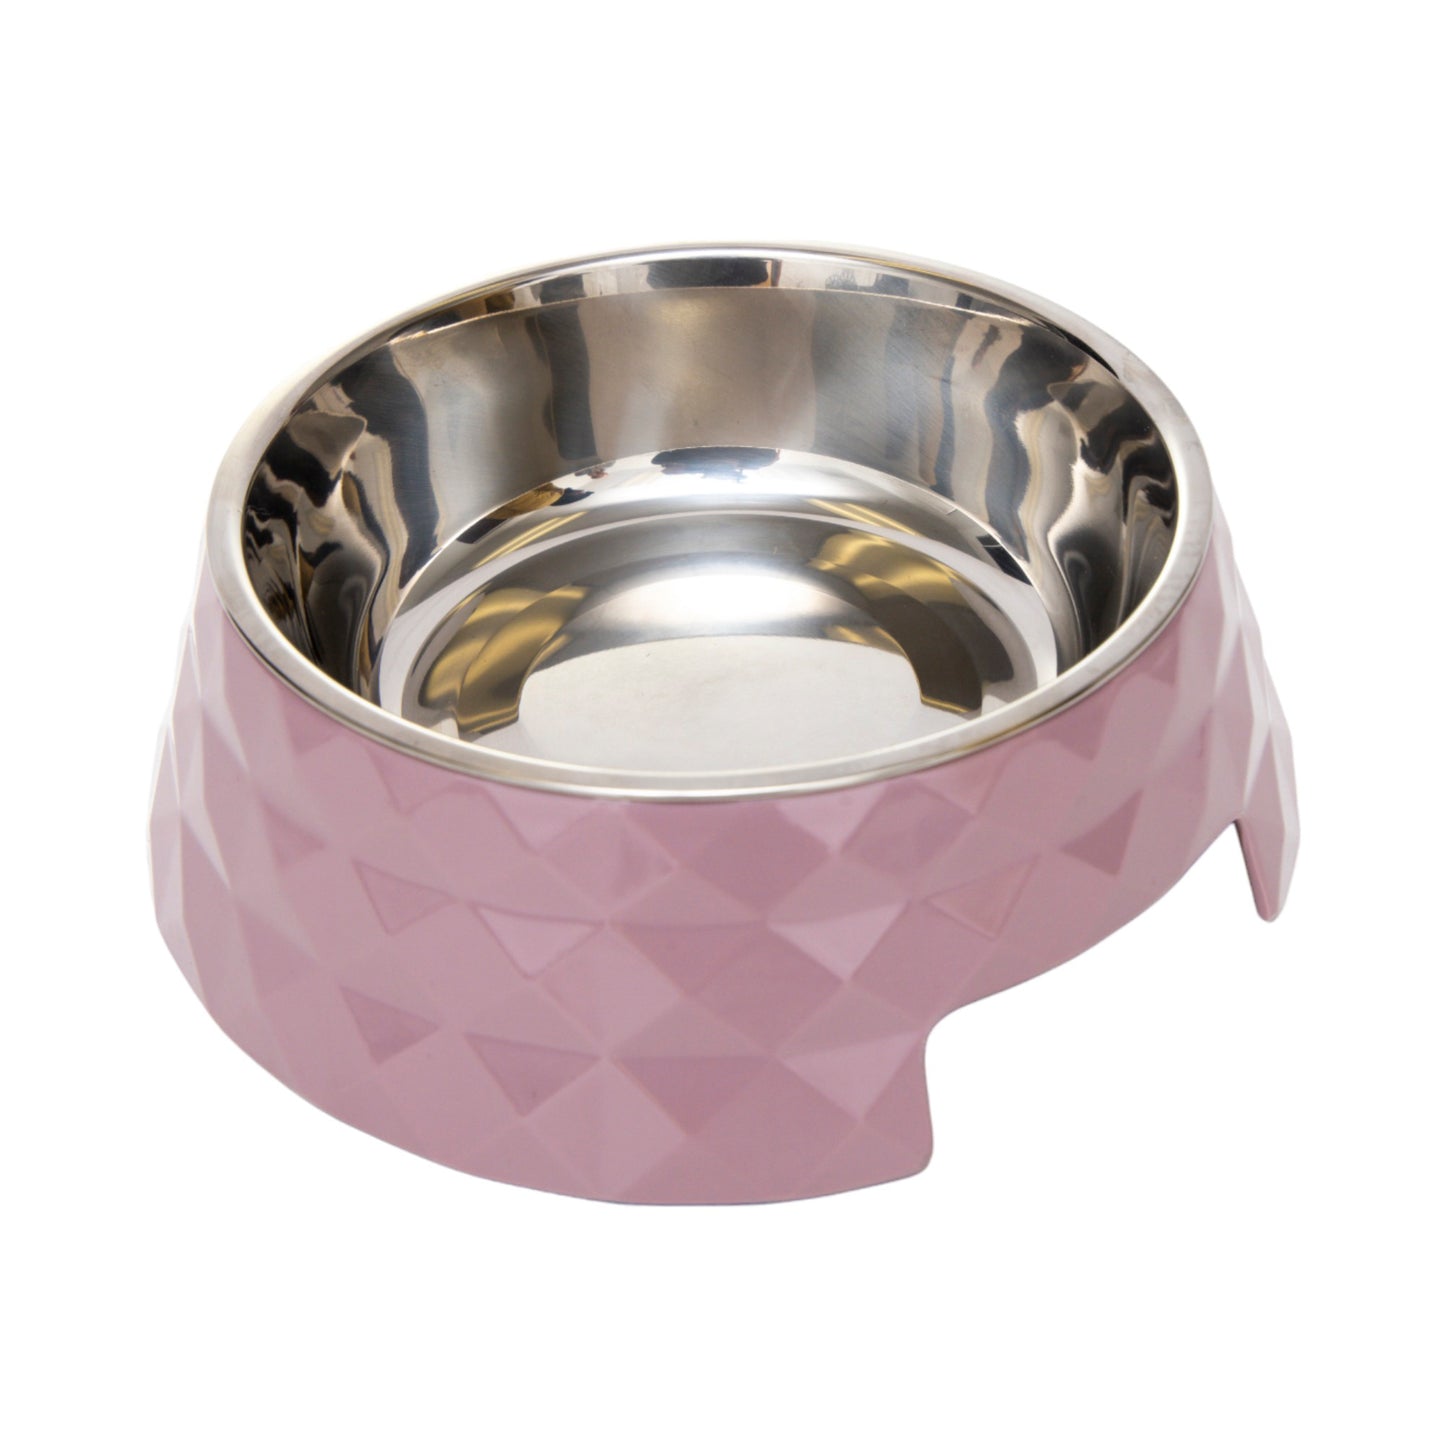 Country Living Set of 2 Diamond Melamine Stainless Steel Dog Bowls (Wood Rose)